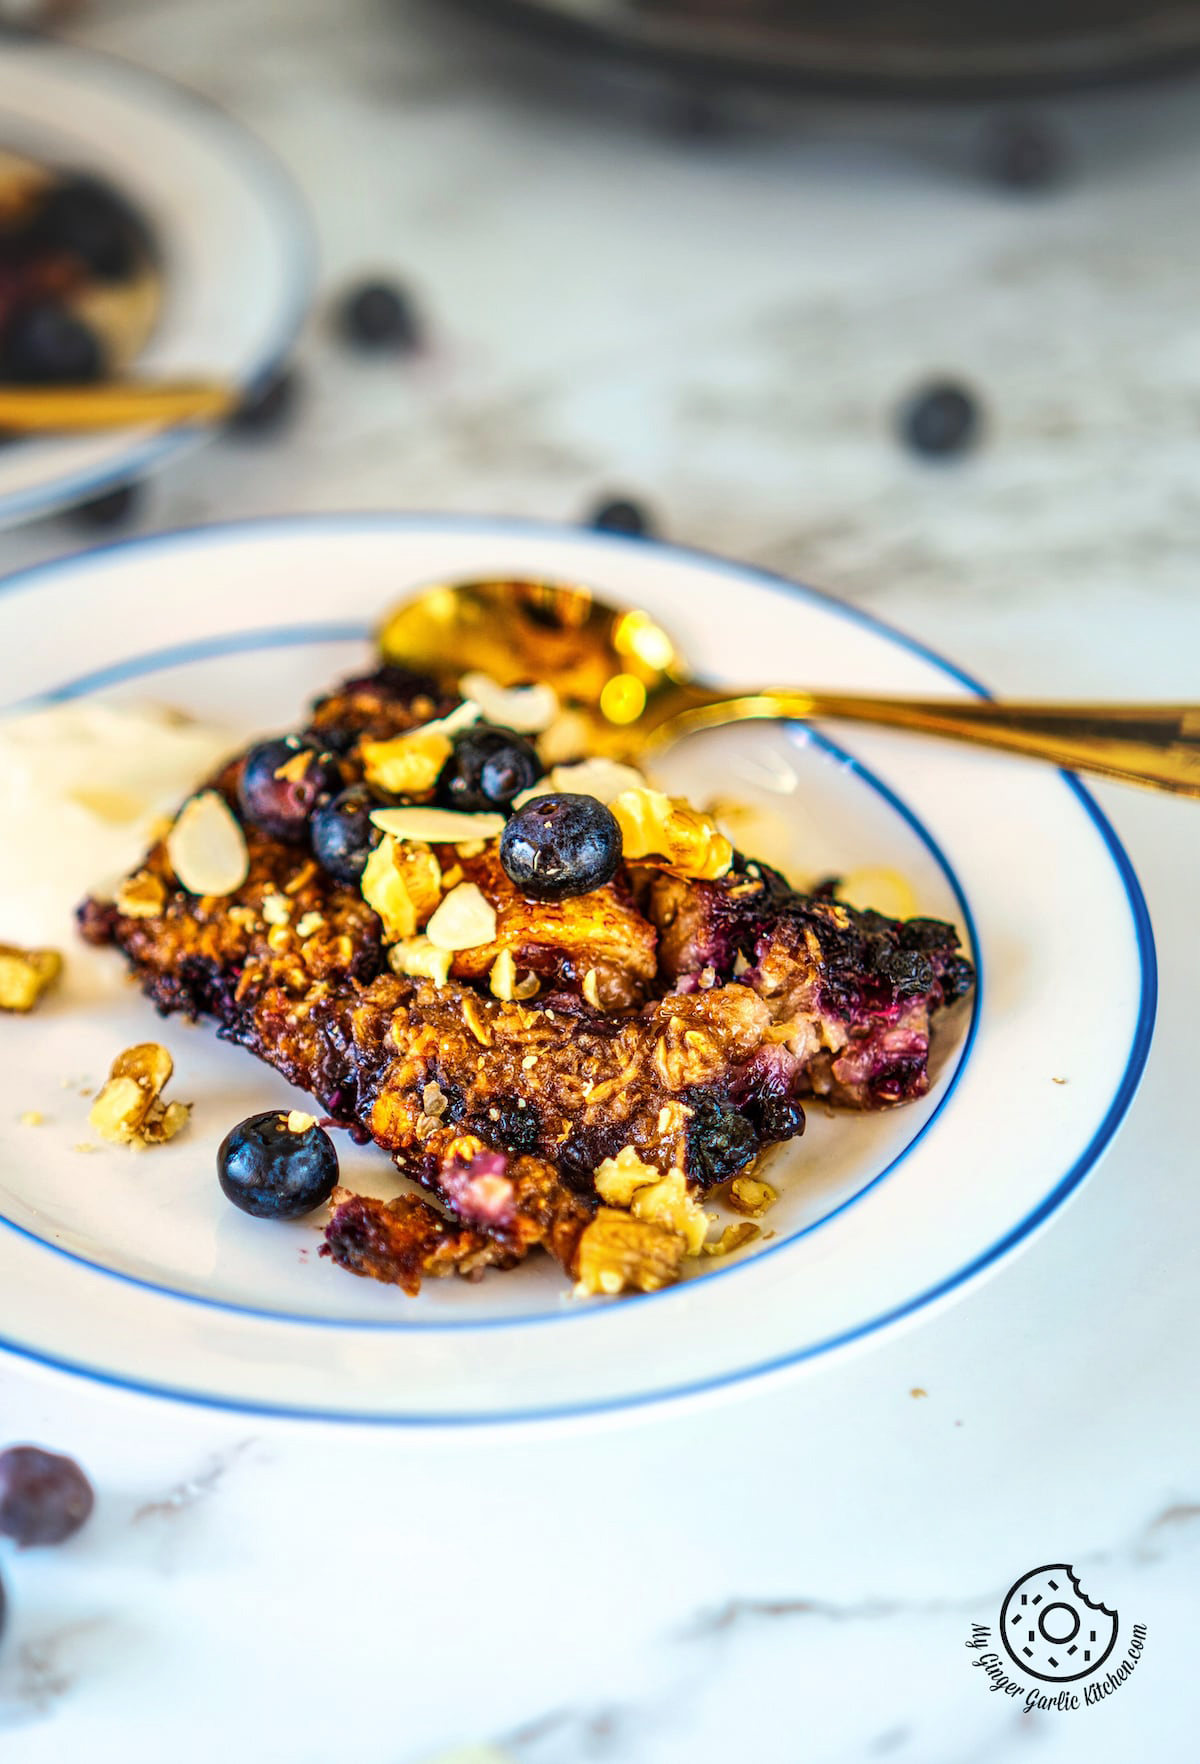 a closeup shot of a a white plate with a slice of banana blueberry baked oatmeal garnished with walnuts, almonds, yogurt, and blueberries